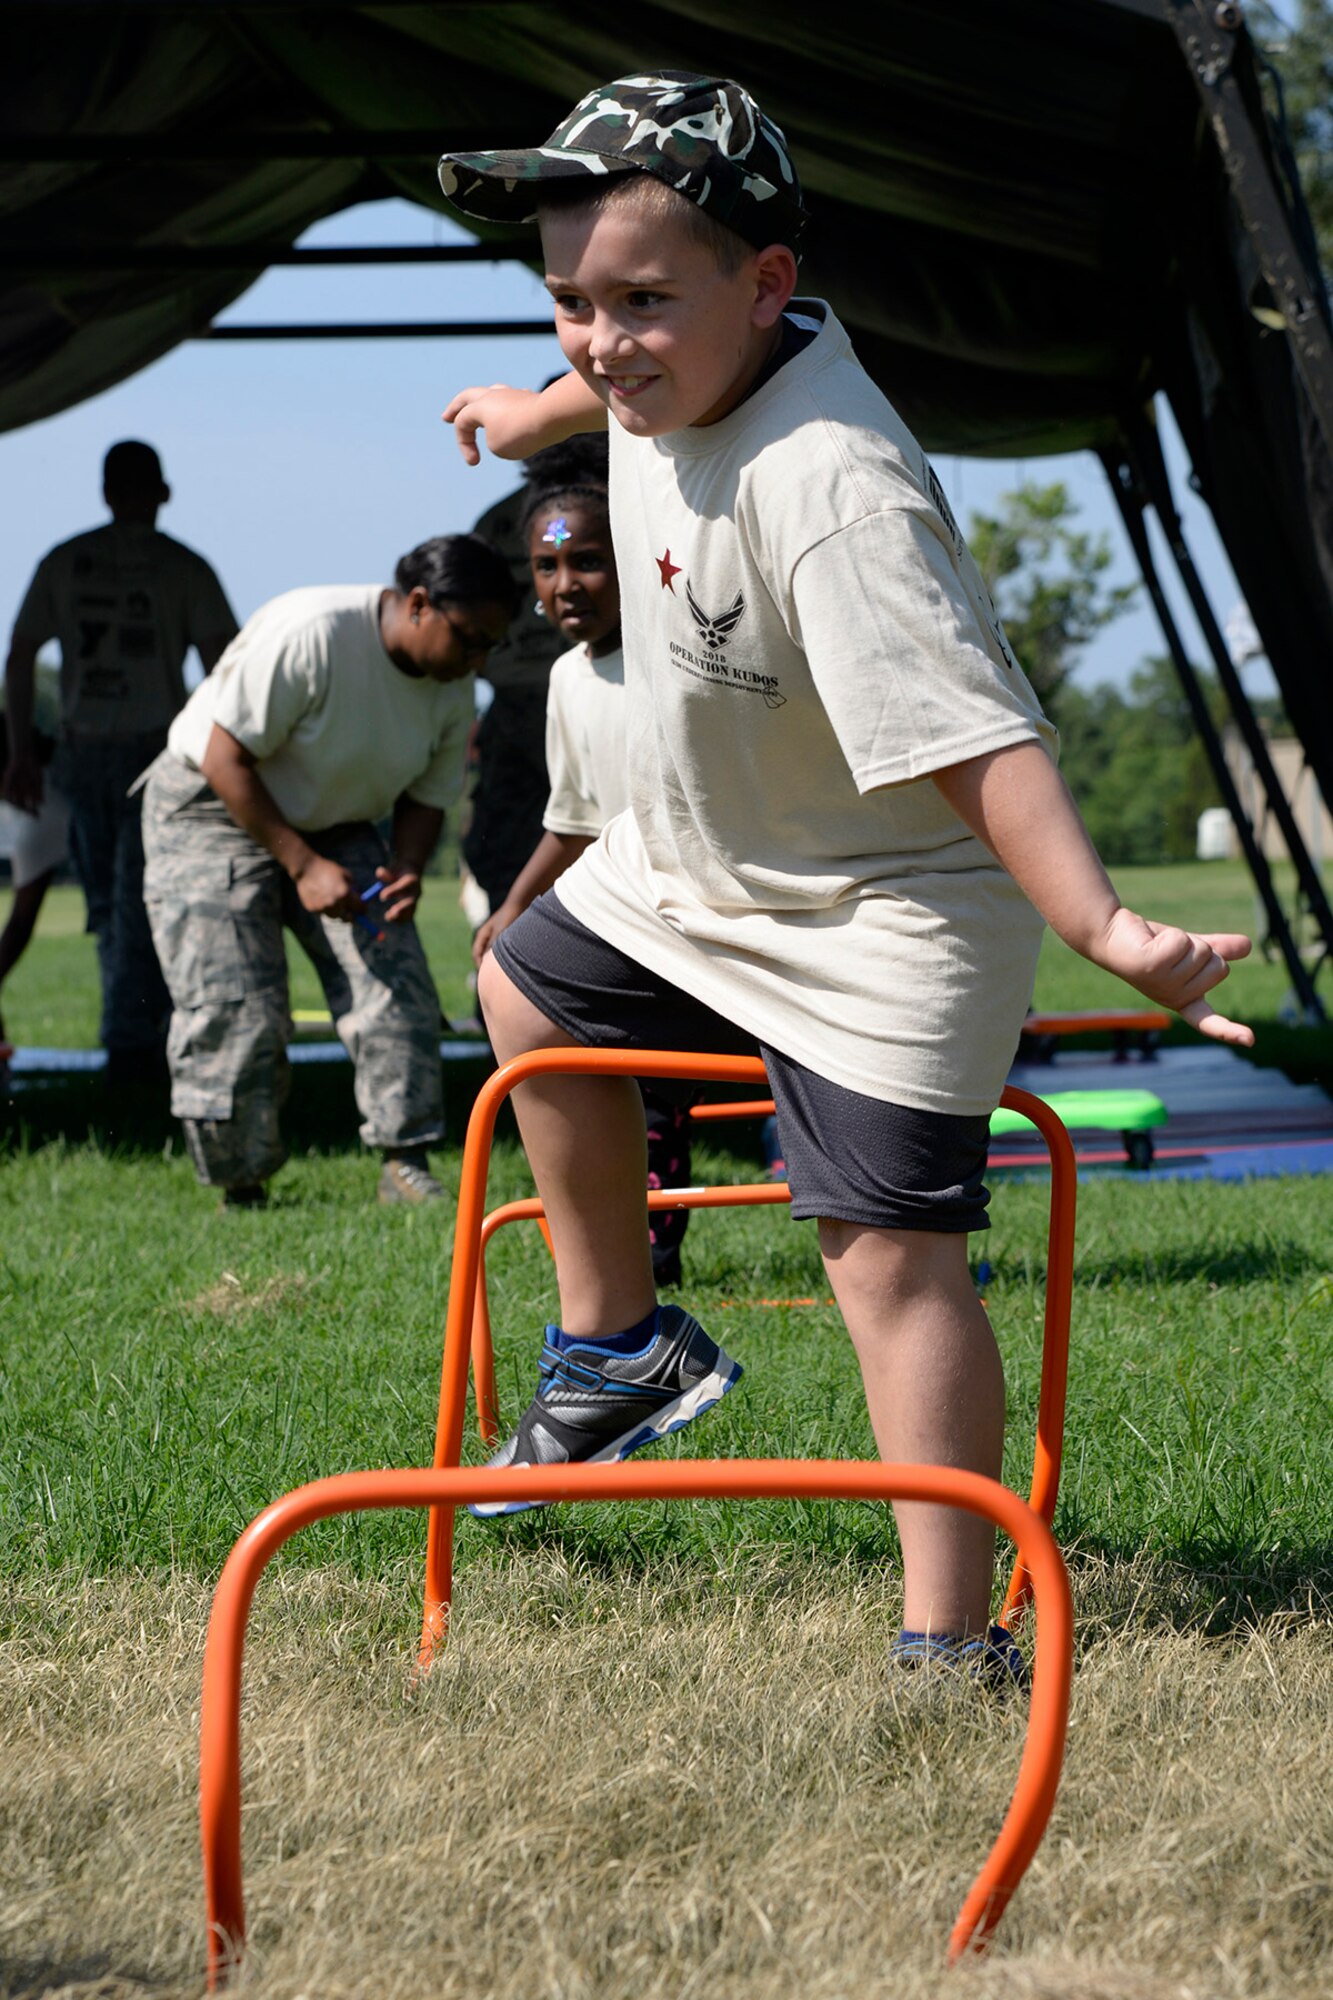 Children run through an obstacle course at the base youth center during a Kids/Teachers Understanding Deployment Operations event Aug. 9, 2018, at Dover Air Force Base, Del. Children and teachers simulated what it means to be combat fit for deployment operations. (U.S. Air Force photo by Tech. Sgt. Matt Davis)